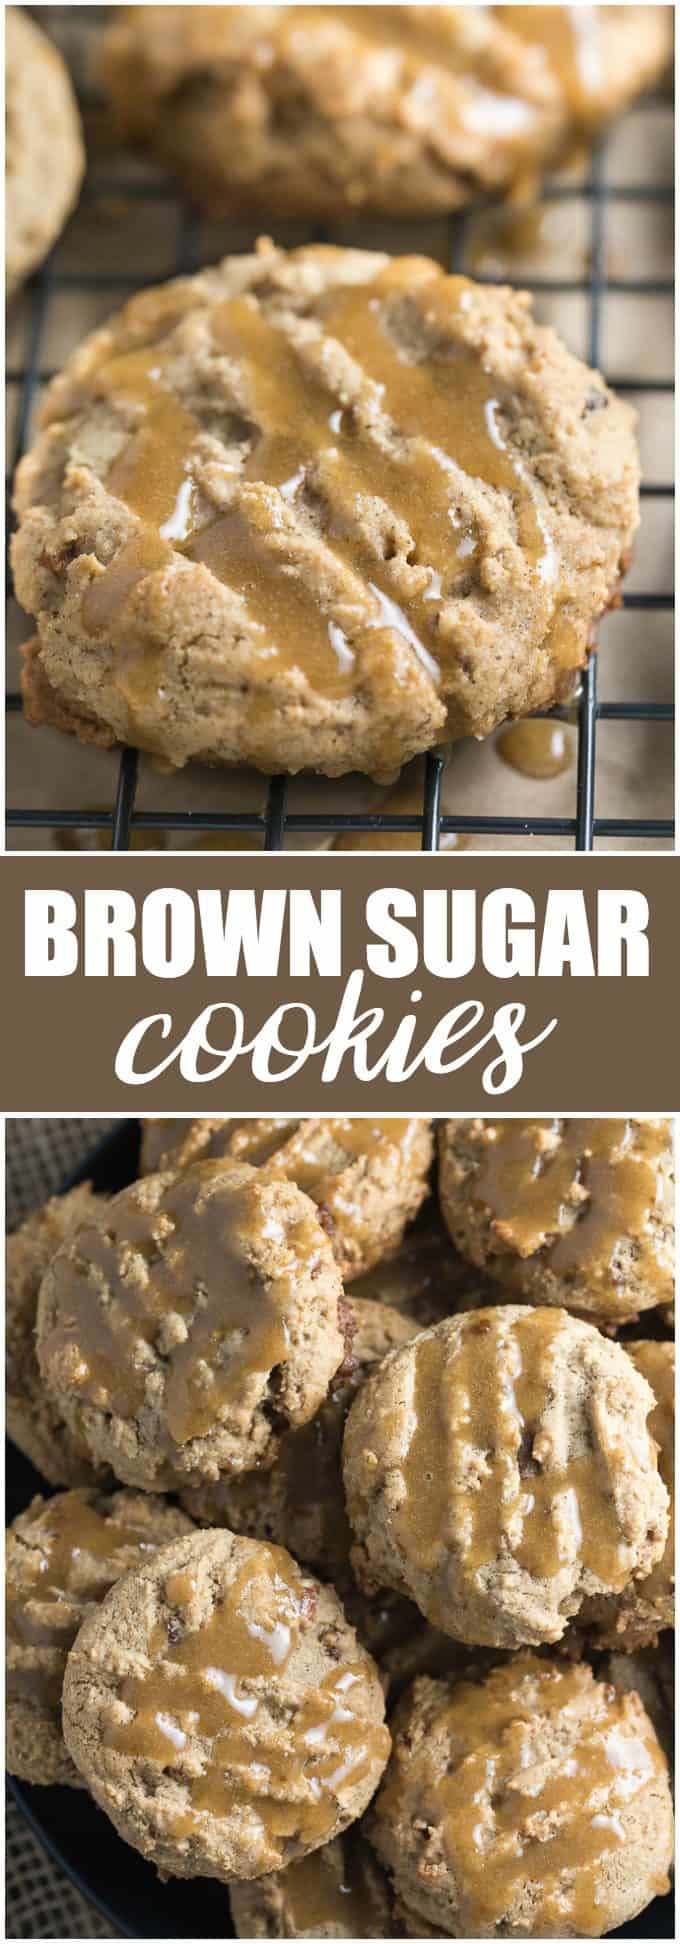 Brown Sugar Cookies - A delicious spin on the traditional with a sugary glaze! Perfect for the holidays or a weekend treat.